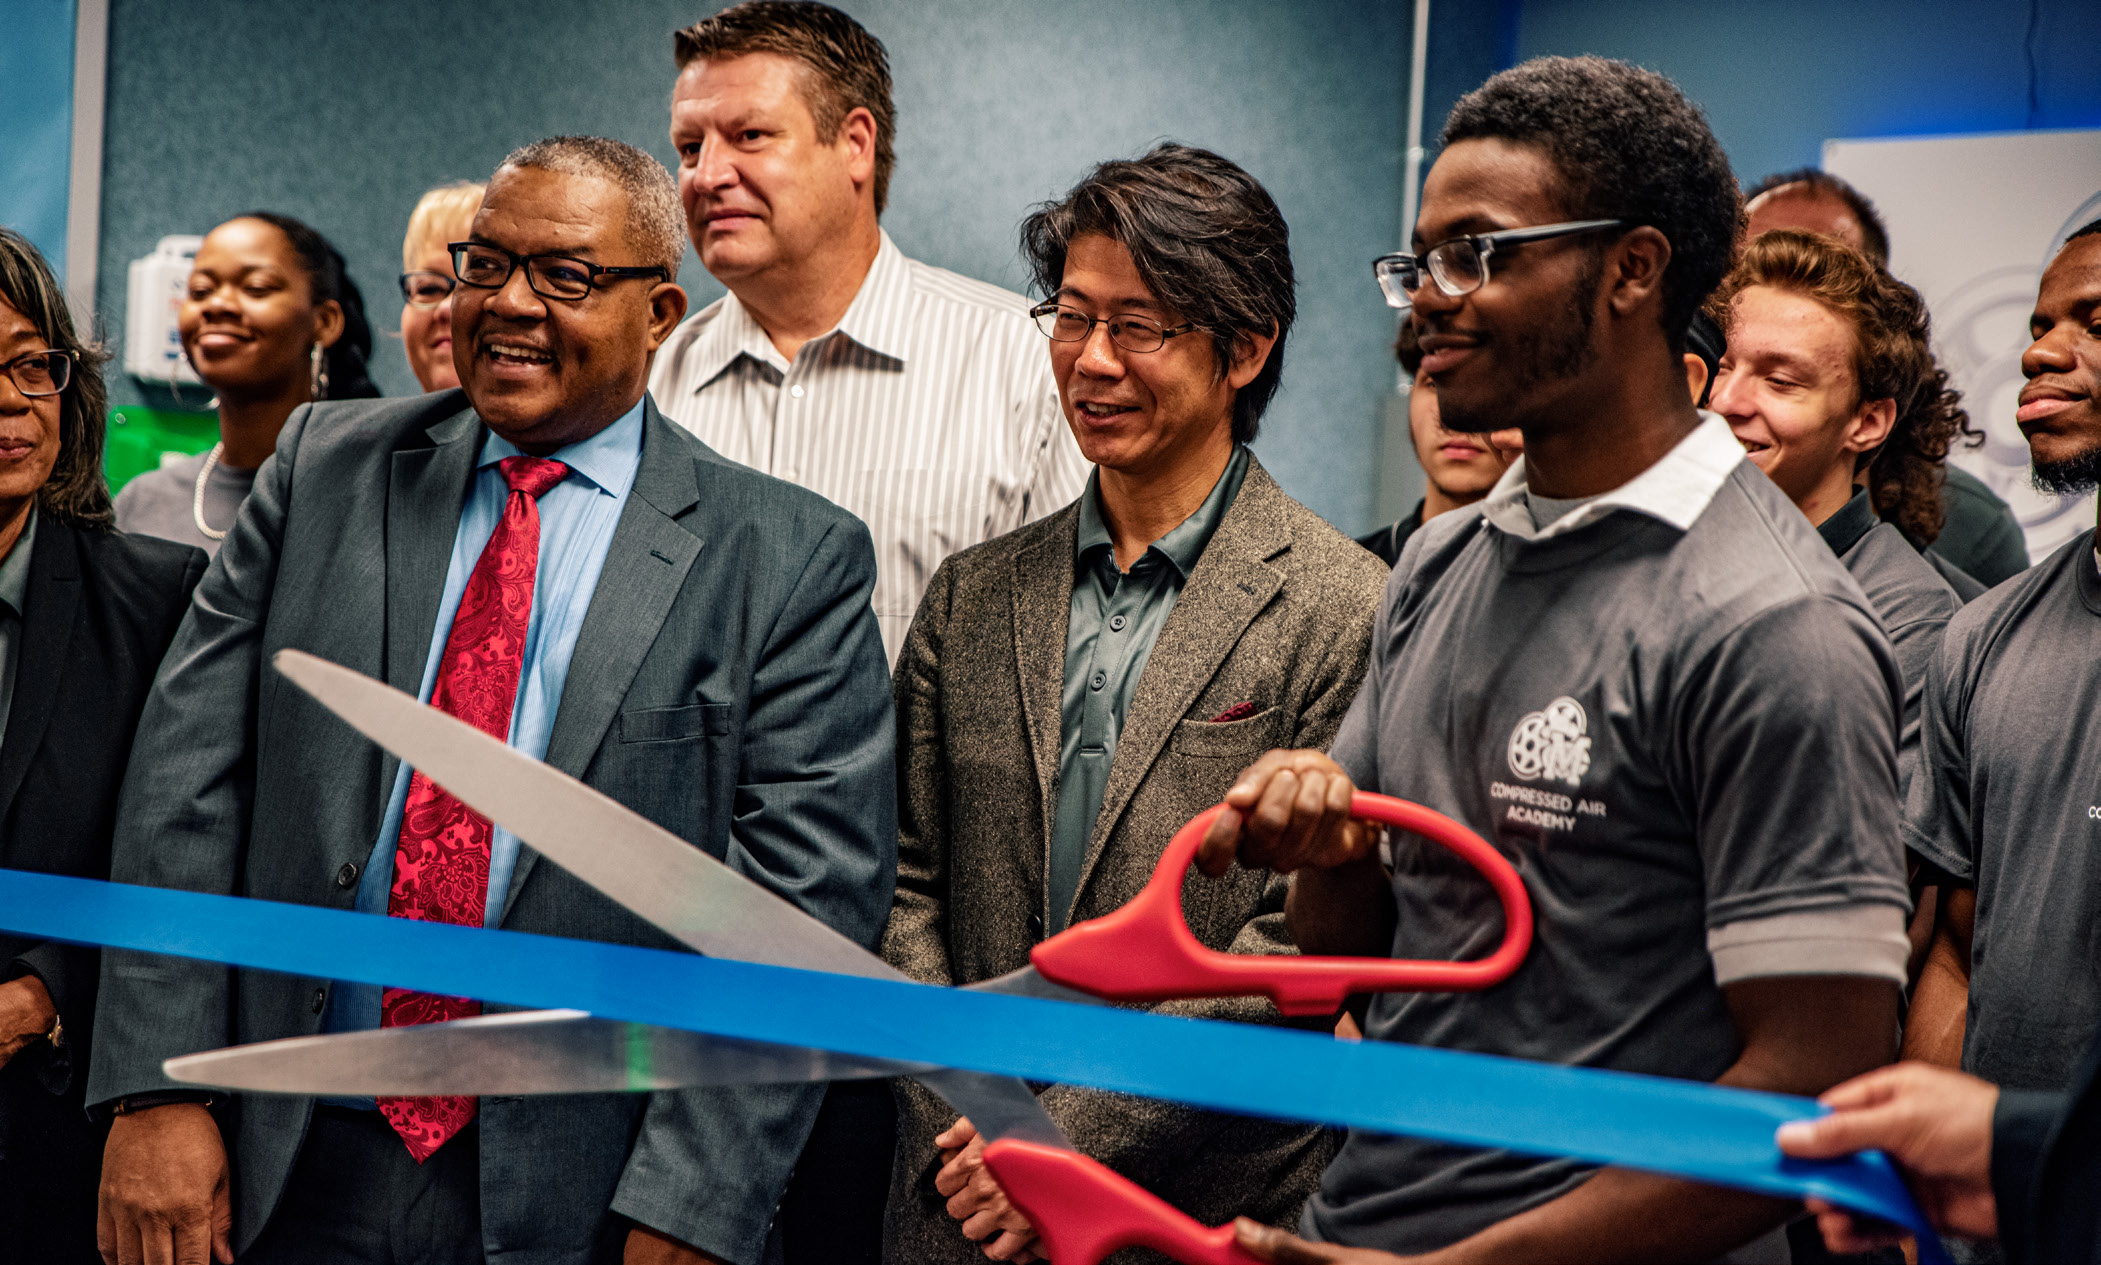 Sullair celebrates the ribbon cutting of the Compressed Air Academy at Michigan City High School